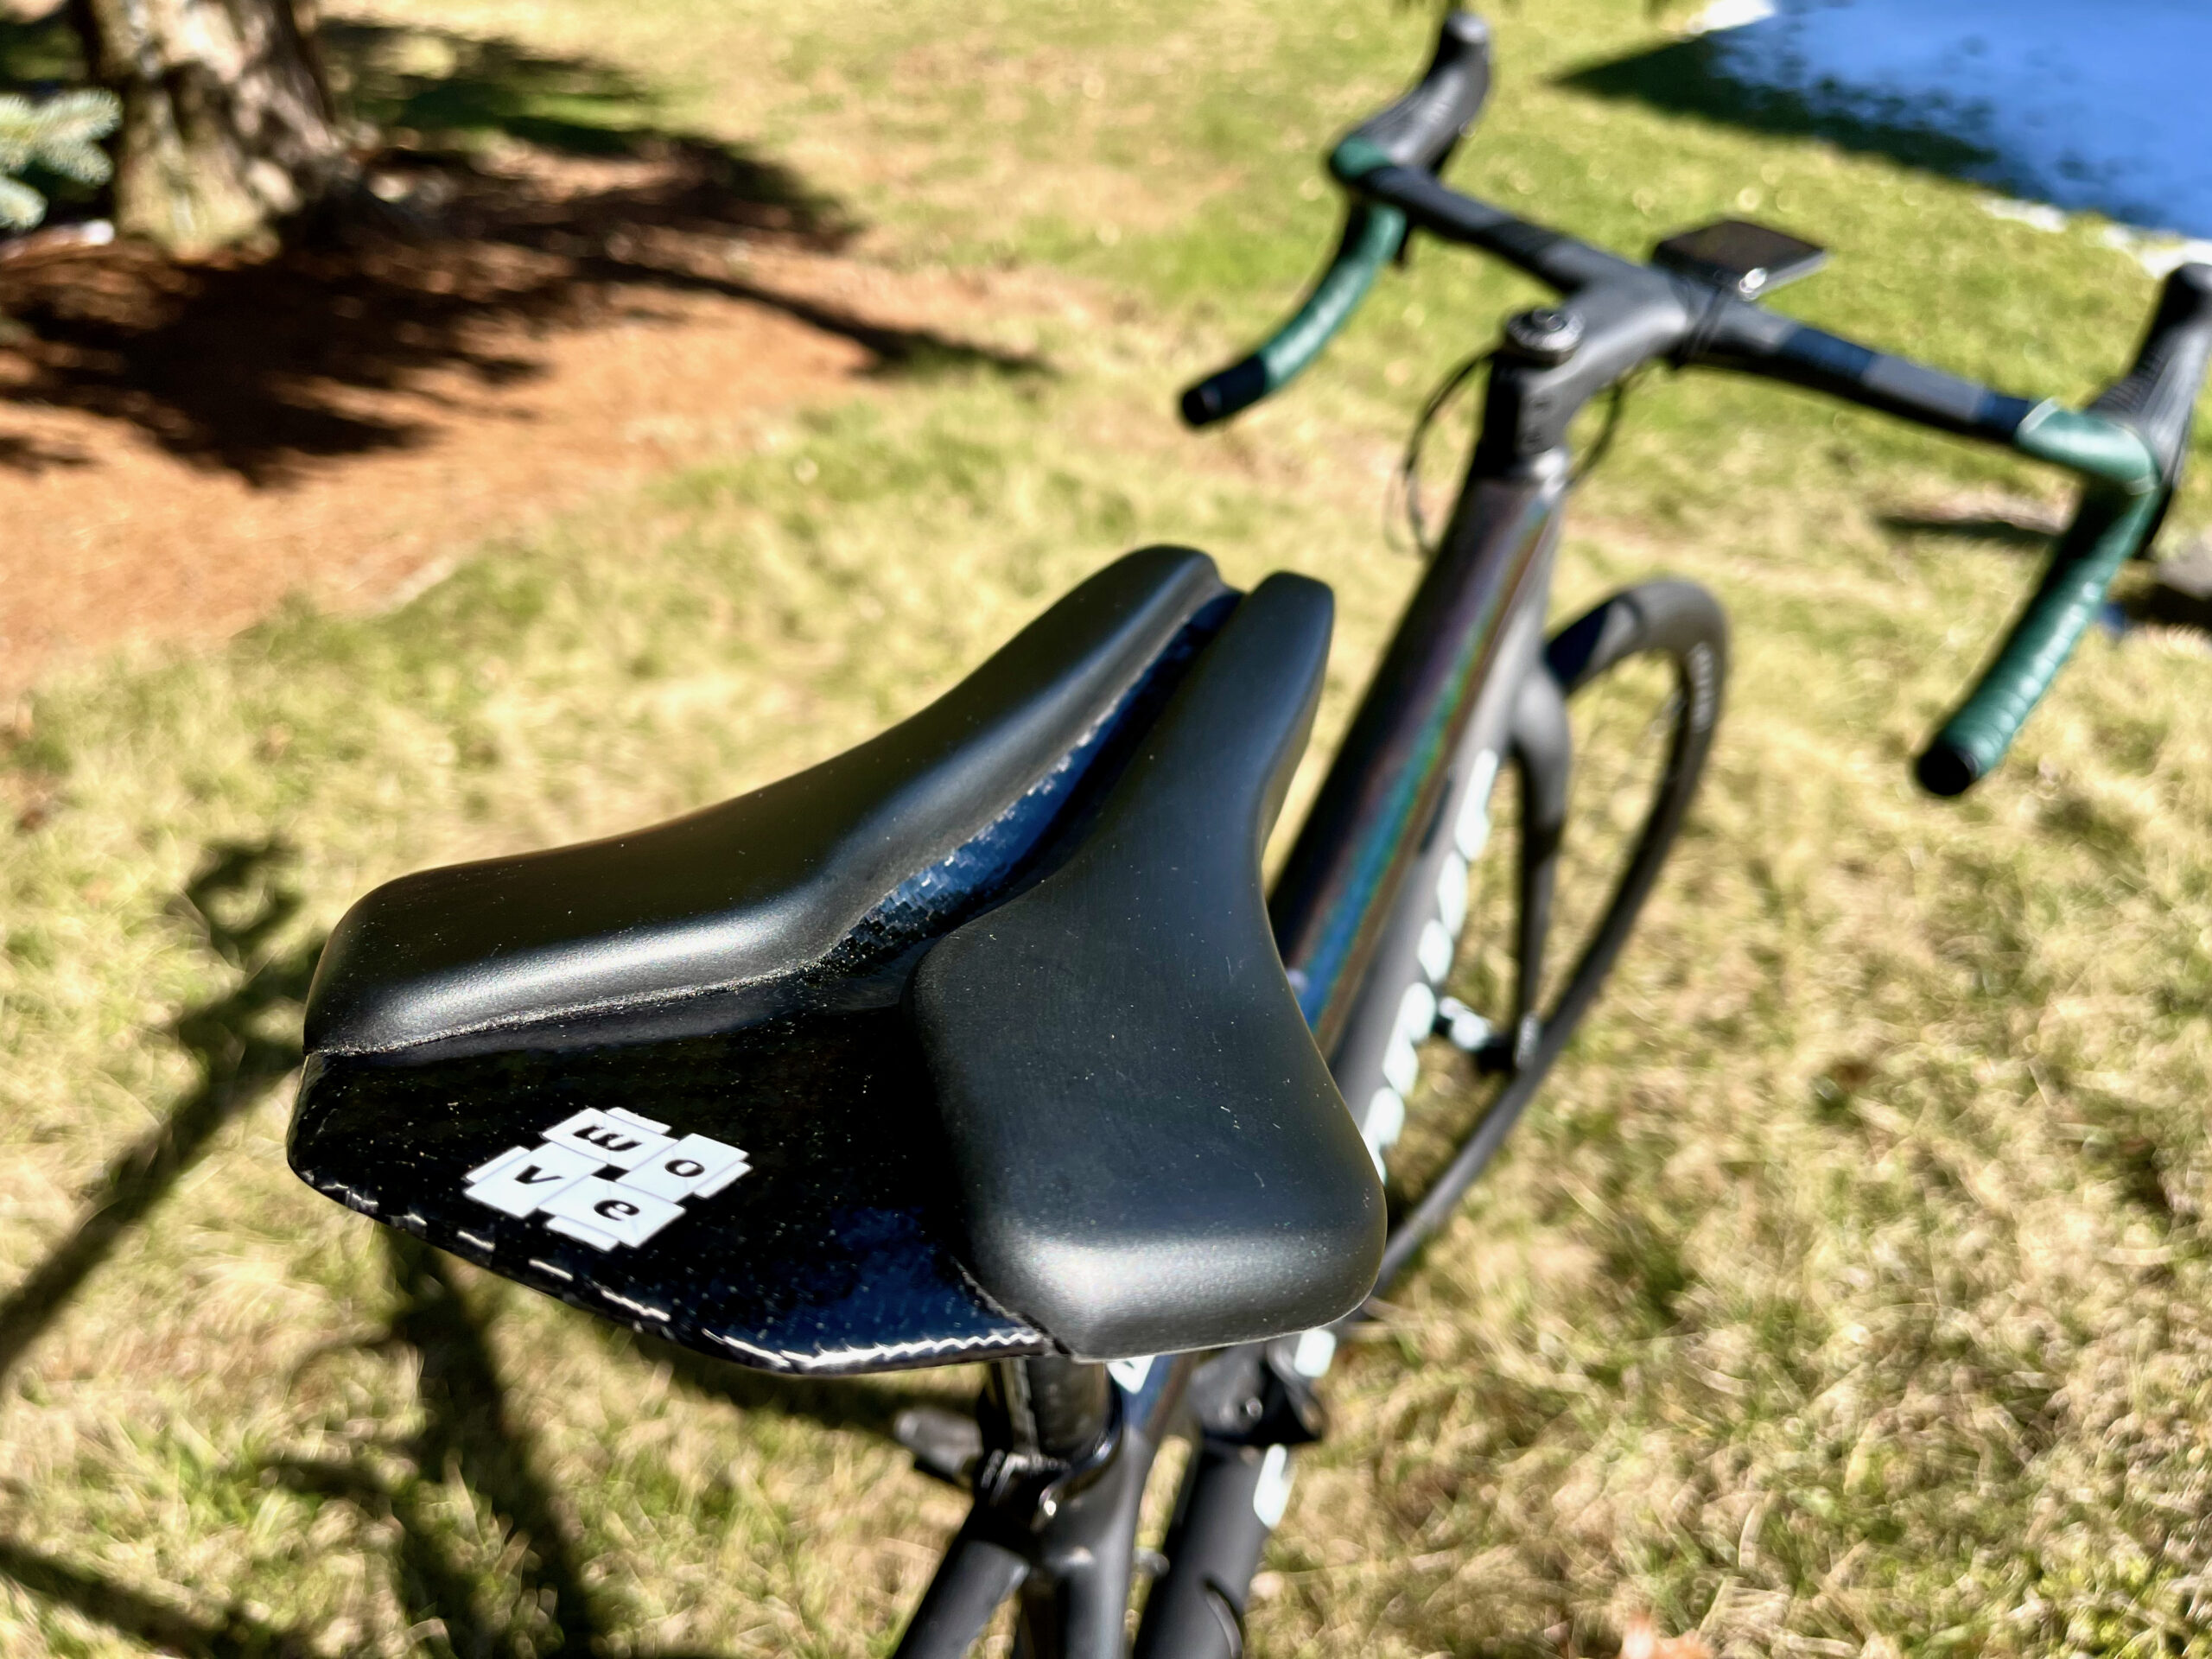 Wove Mags Saddle Review: Worth the Investment or Overpriced Luxury?